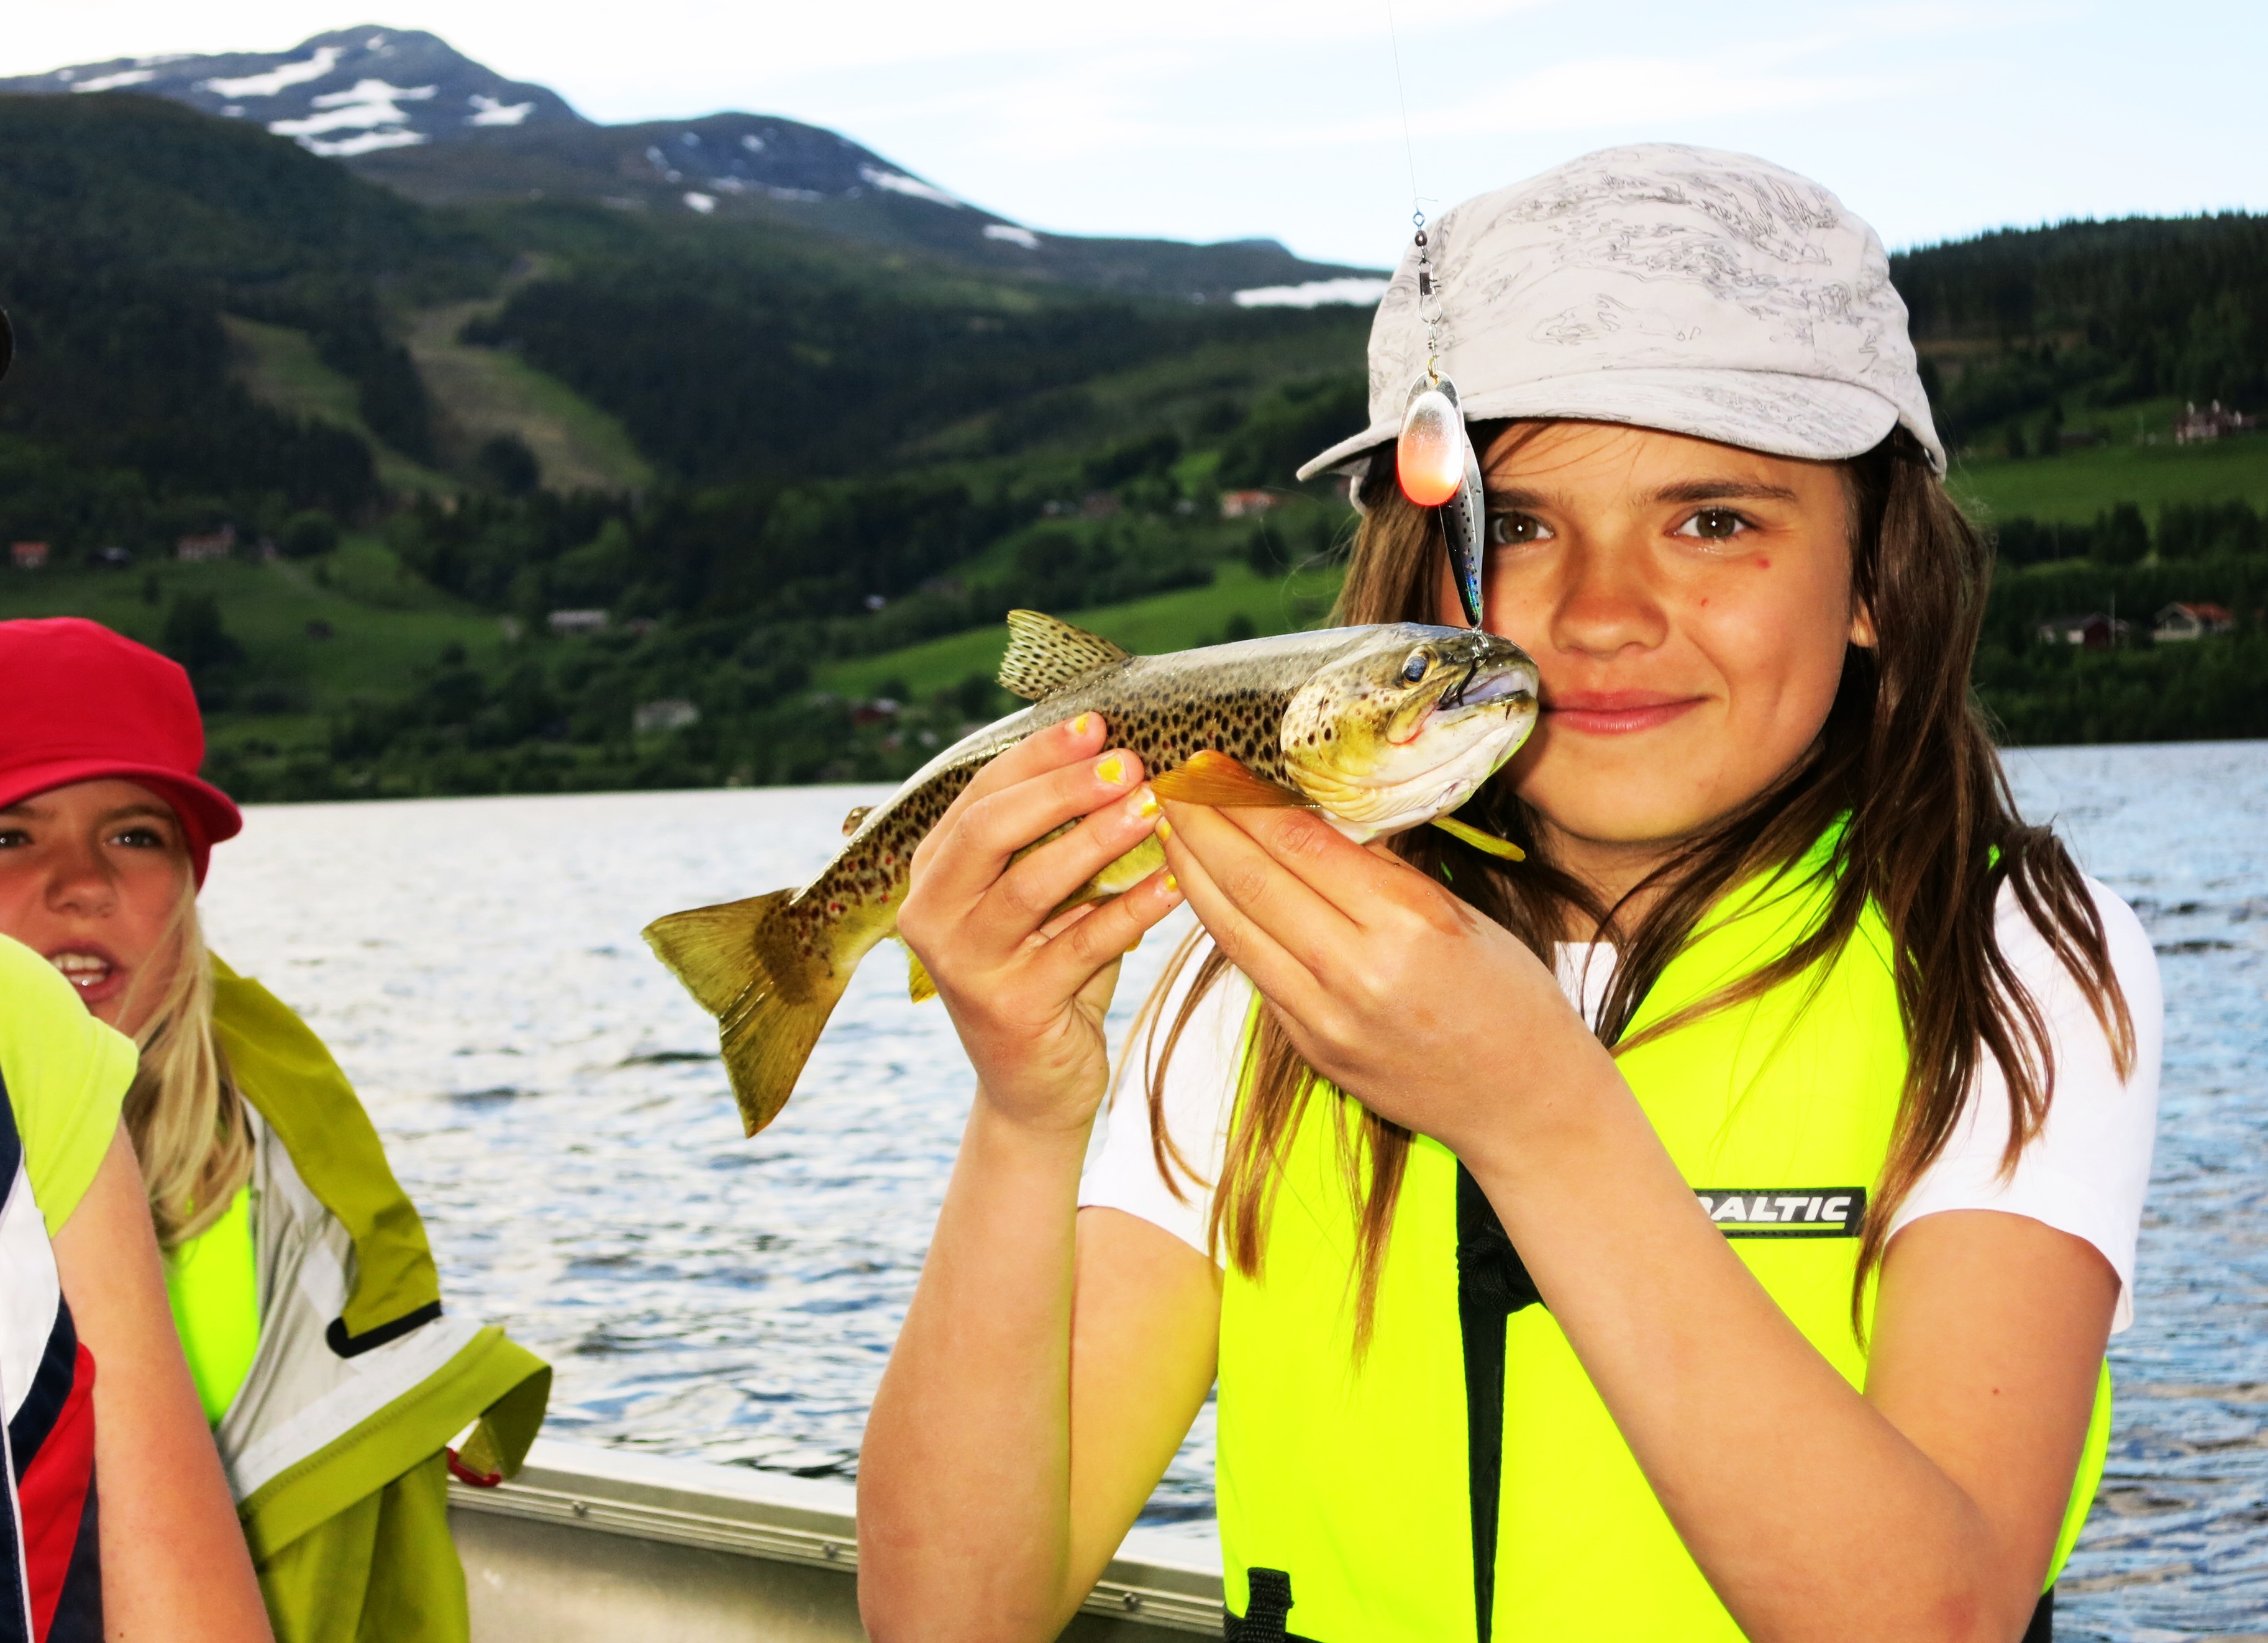 Guided fishingtrip and “taste your fish”